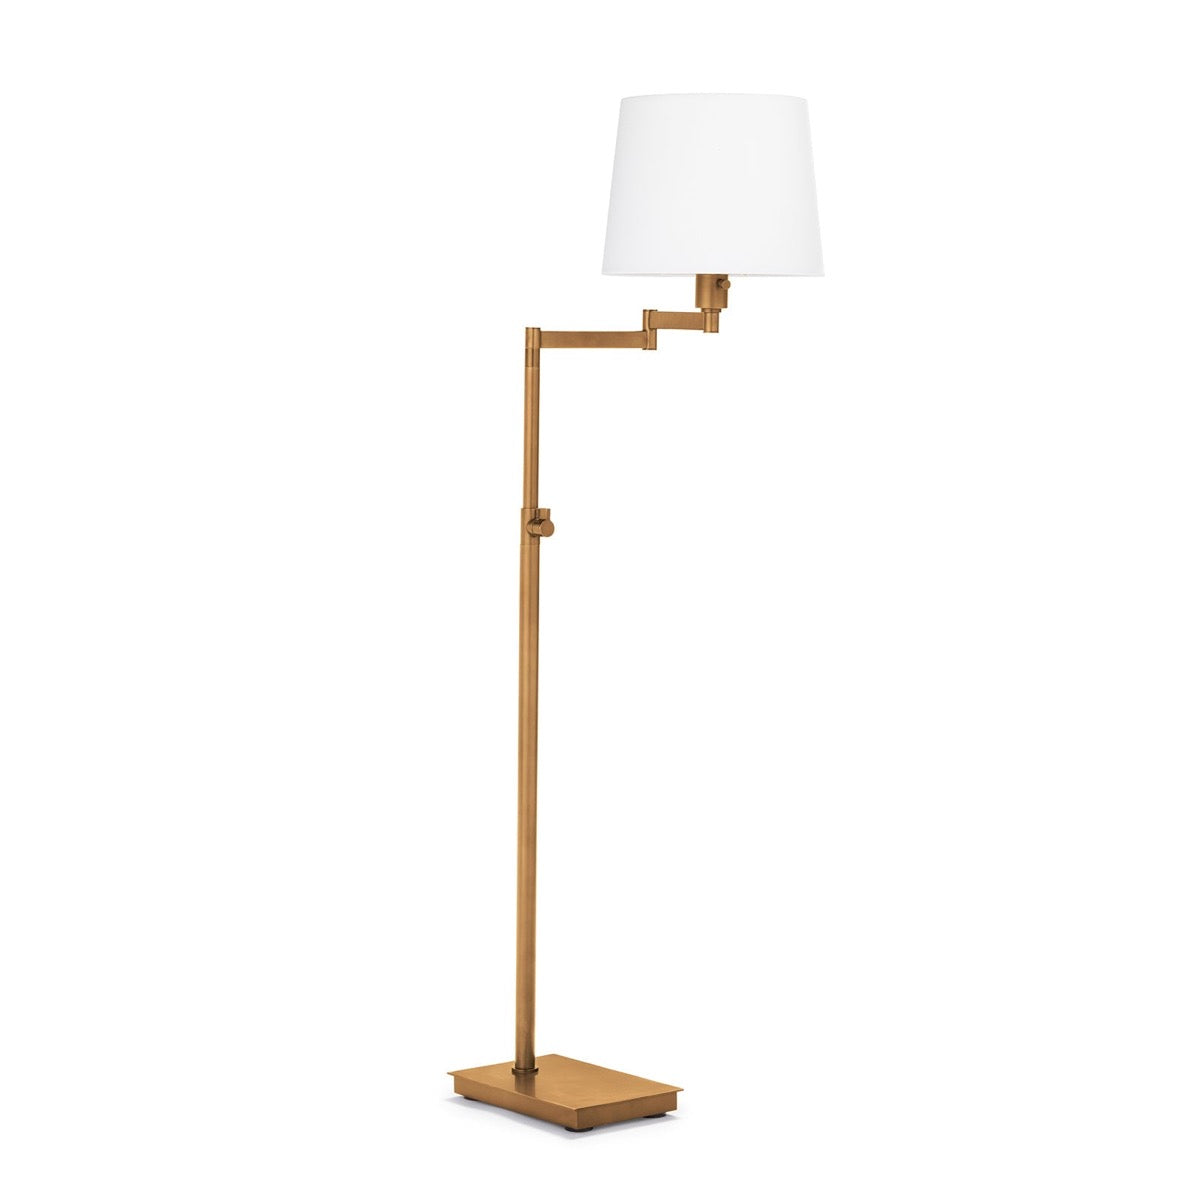 Virtue Floor Lamp Natural Brass. Front view.